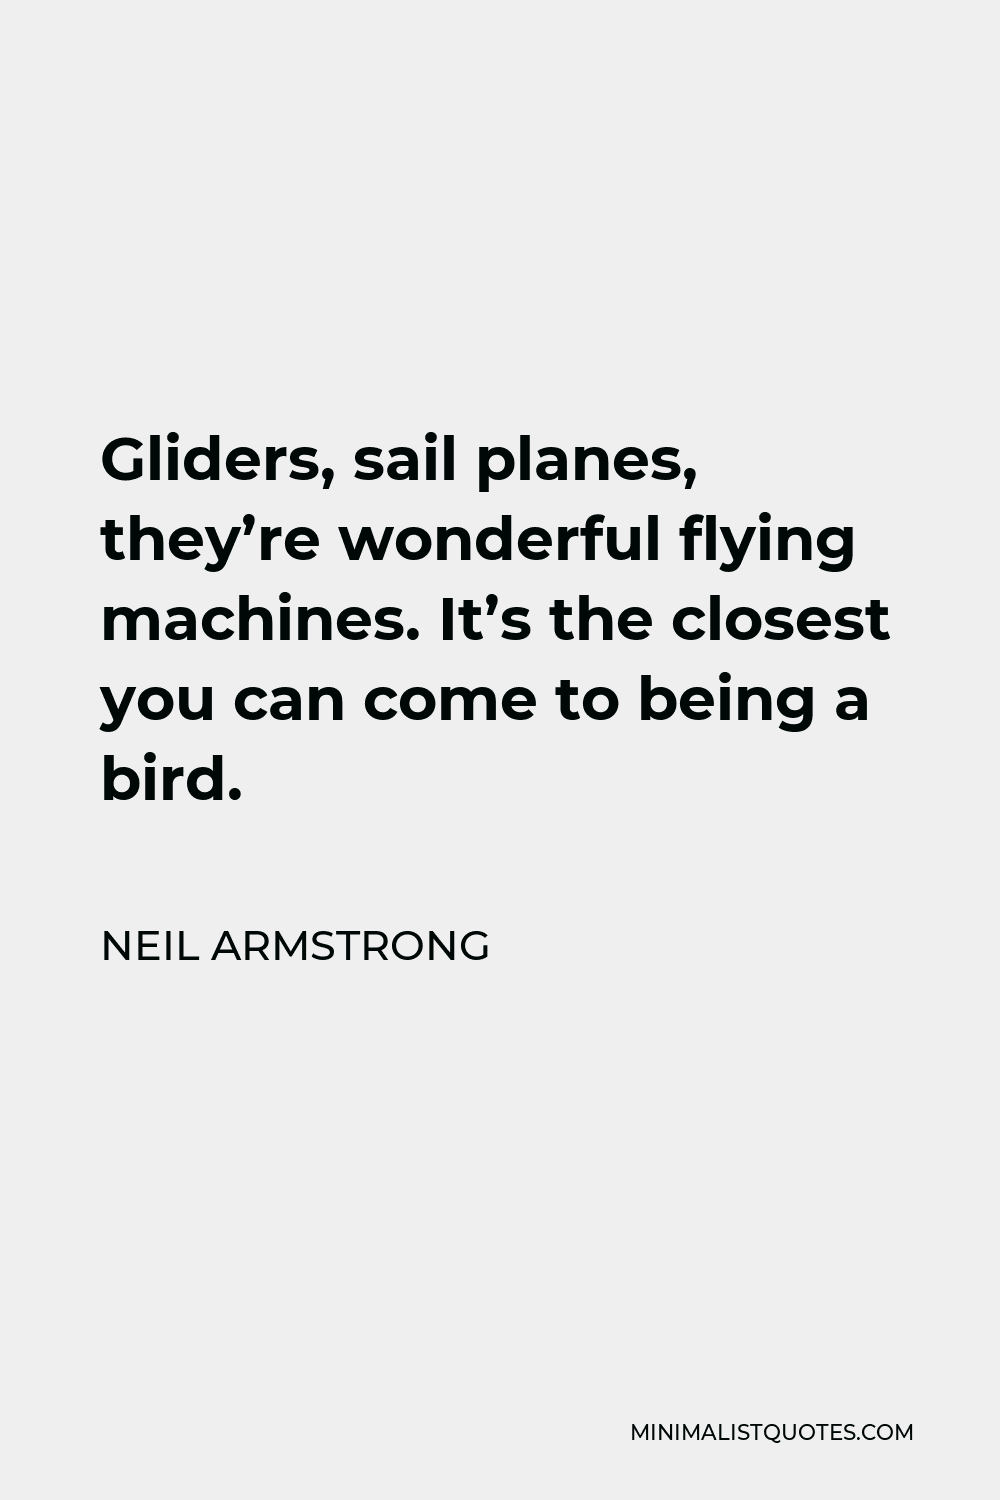 Neil Armstrong Quote - Gliders, sail planes, they’re wonderful flying machines. It’s the closest you can come to being a bird.